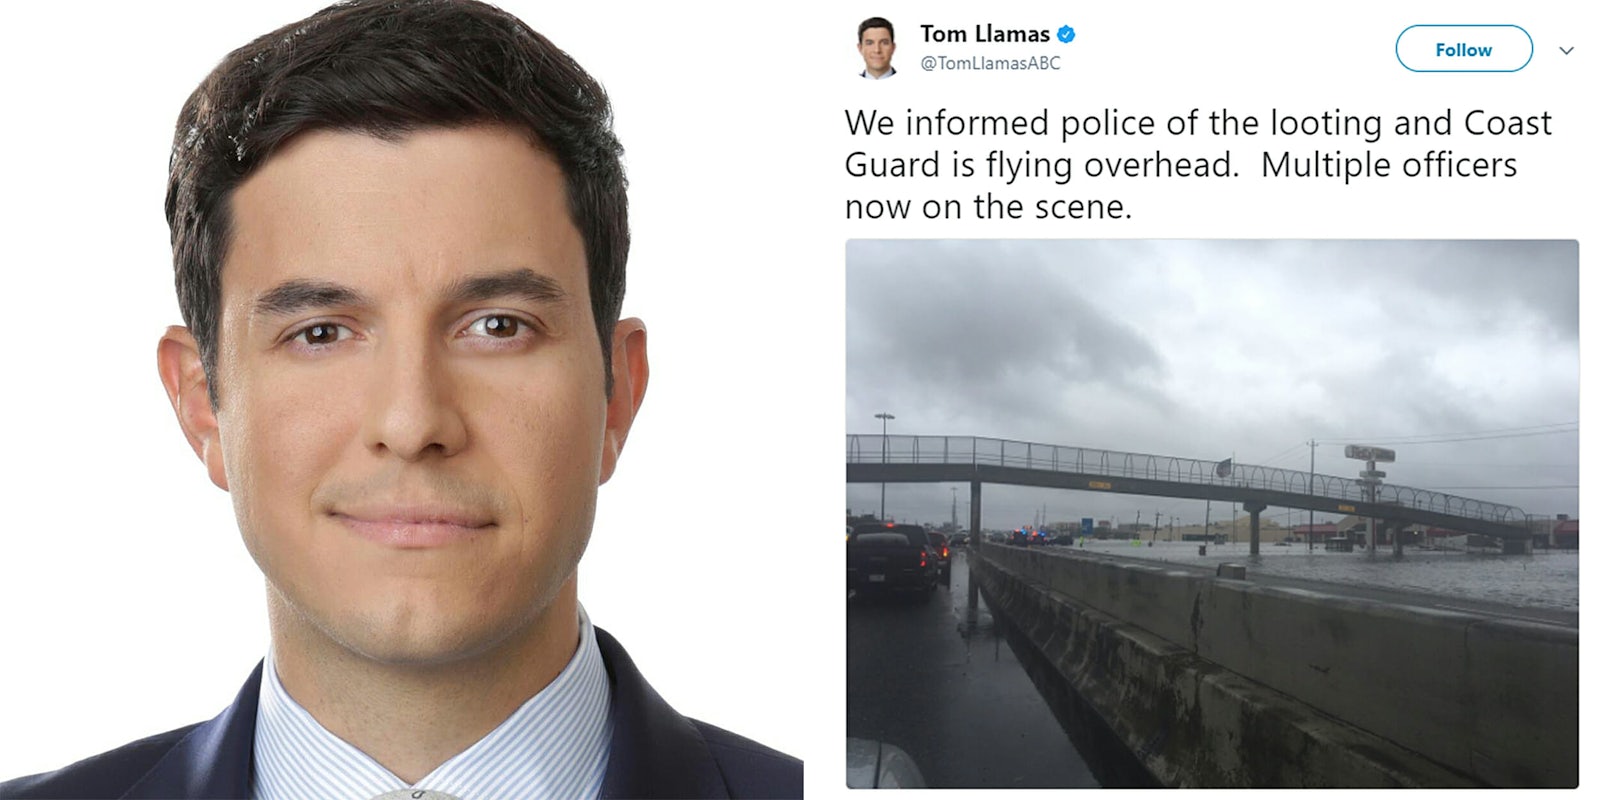 Tom Llamas with tweet that reads 'We informed police of the looting and Coast Guard is flying overhead. Multiple officers now on the scene.'